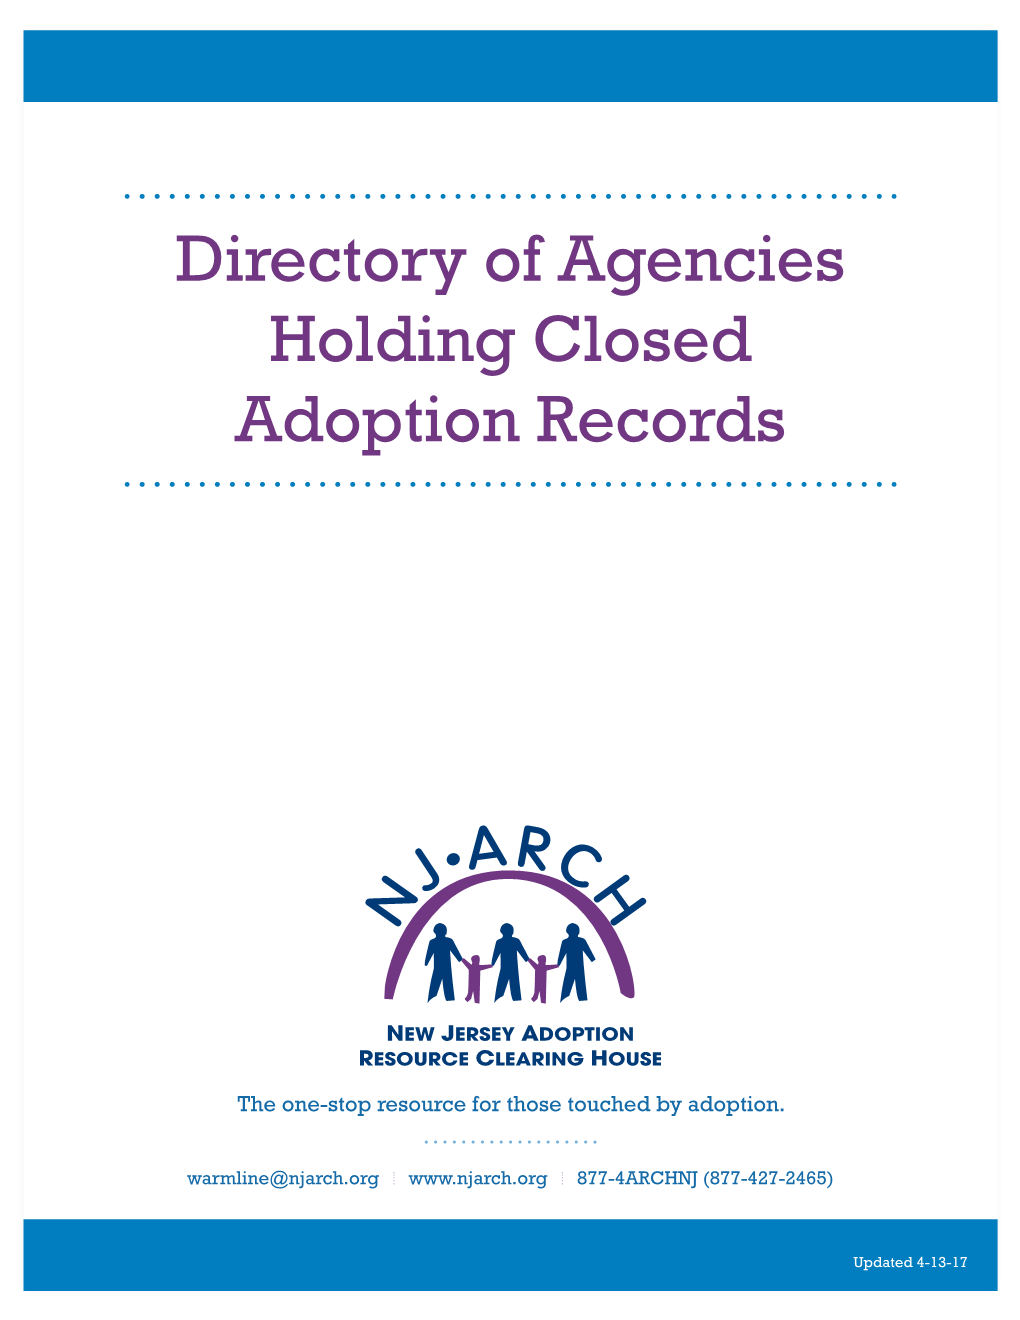 Directory of Agencies Holding Closed Adoption Records